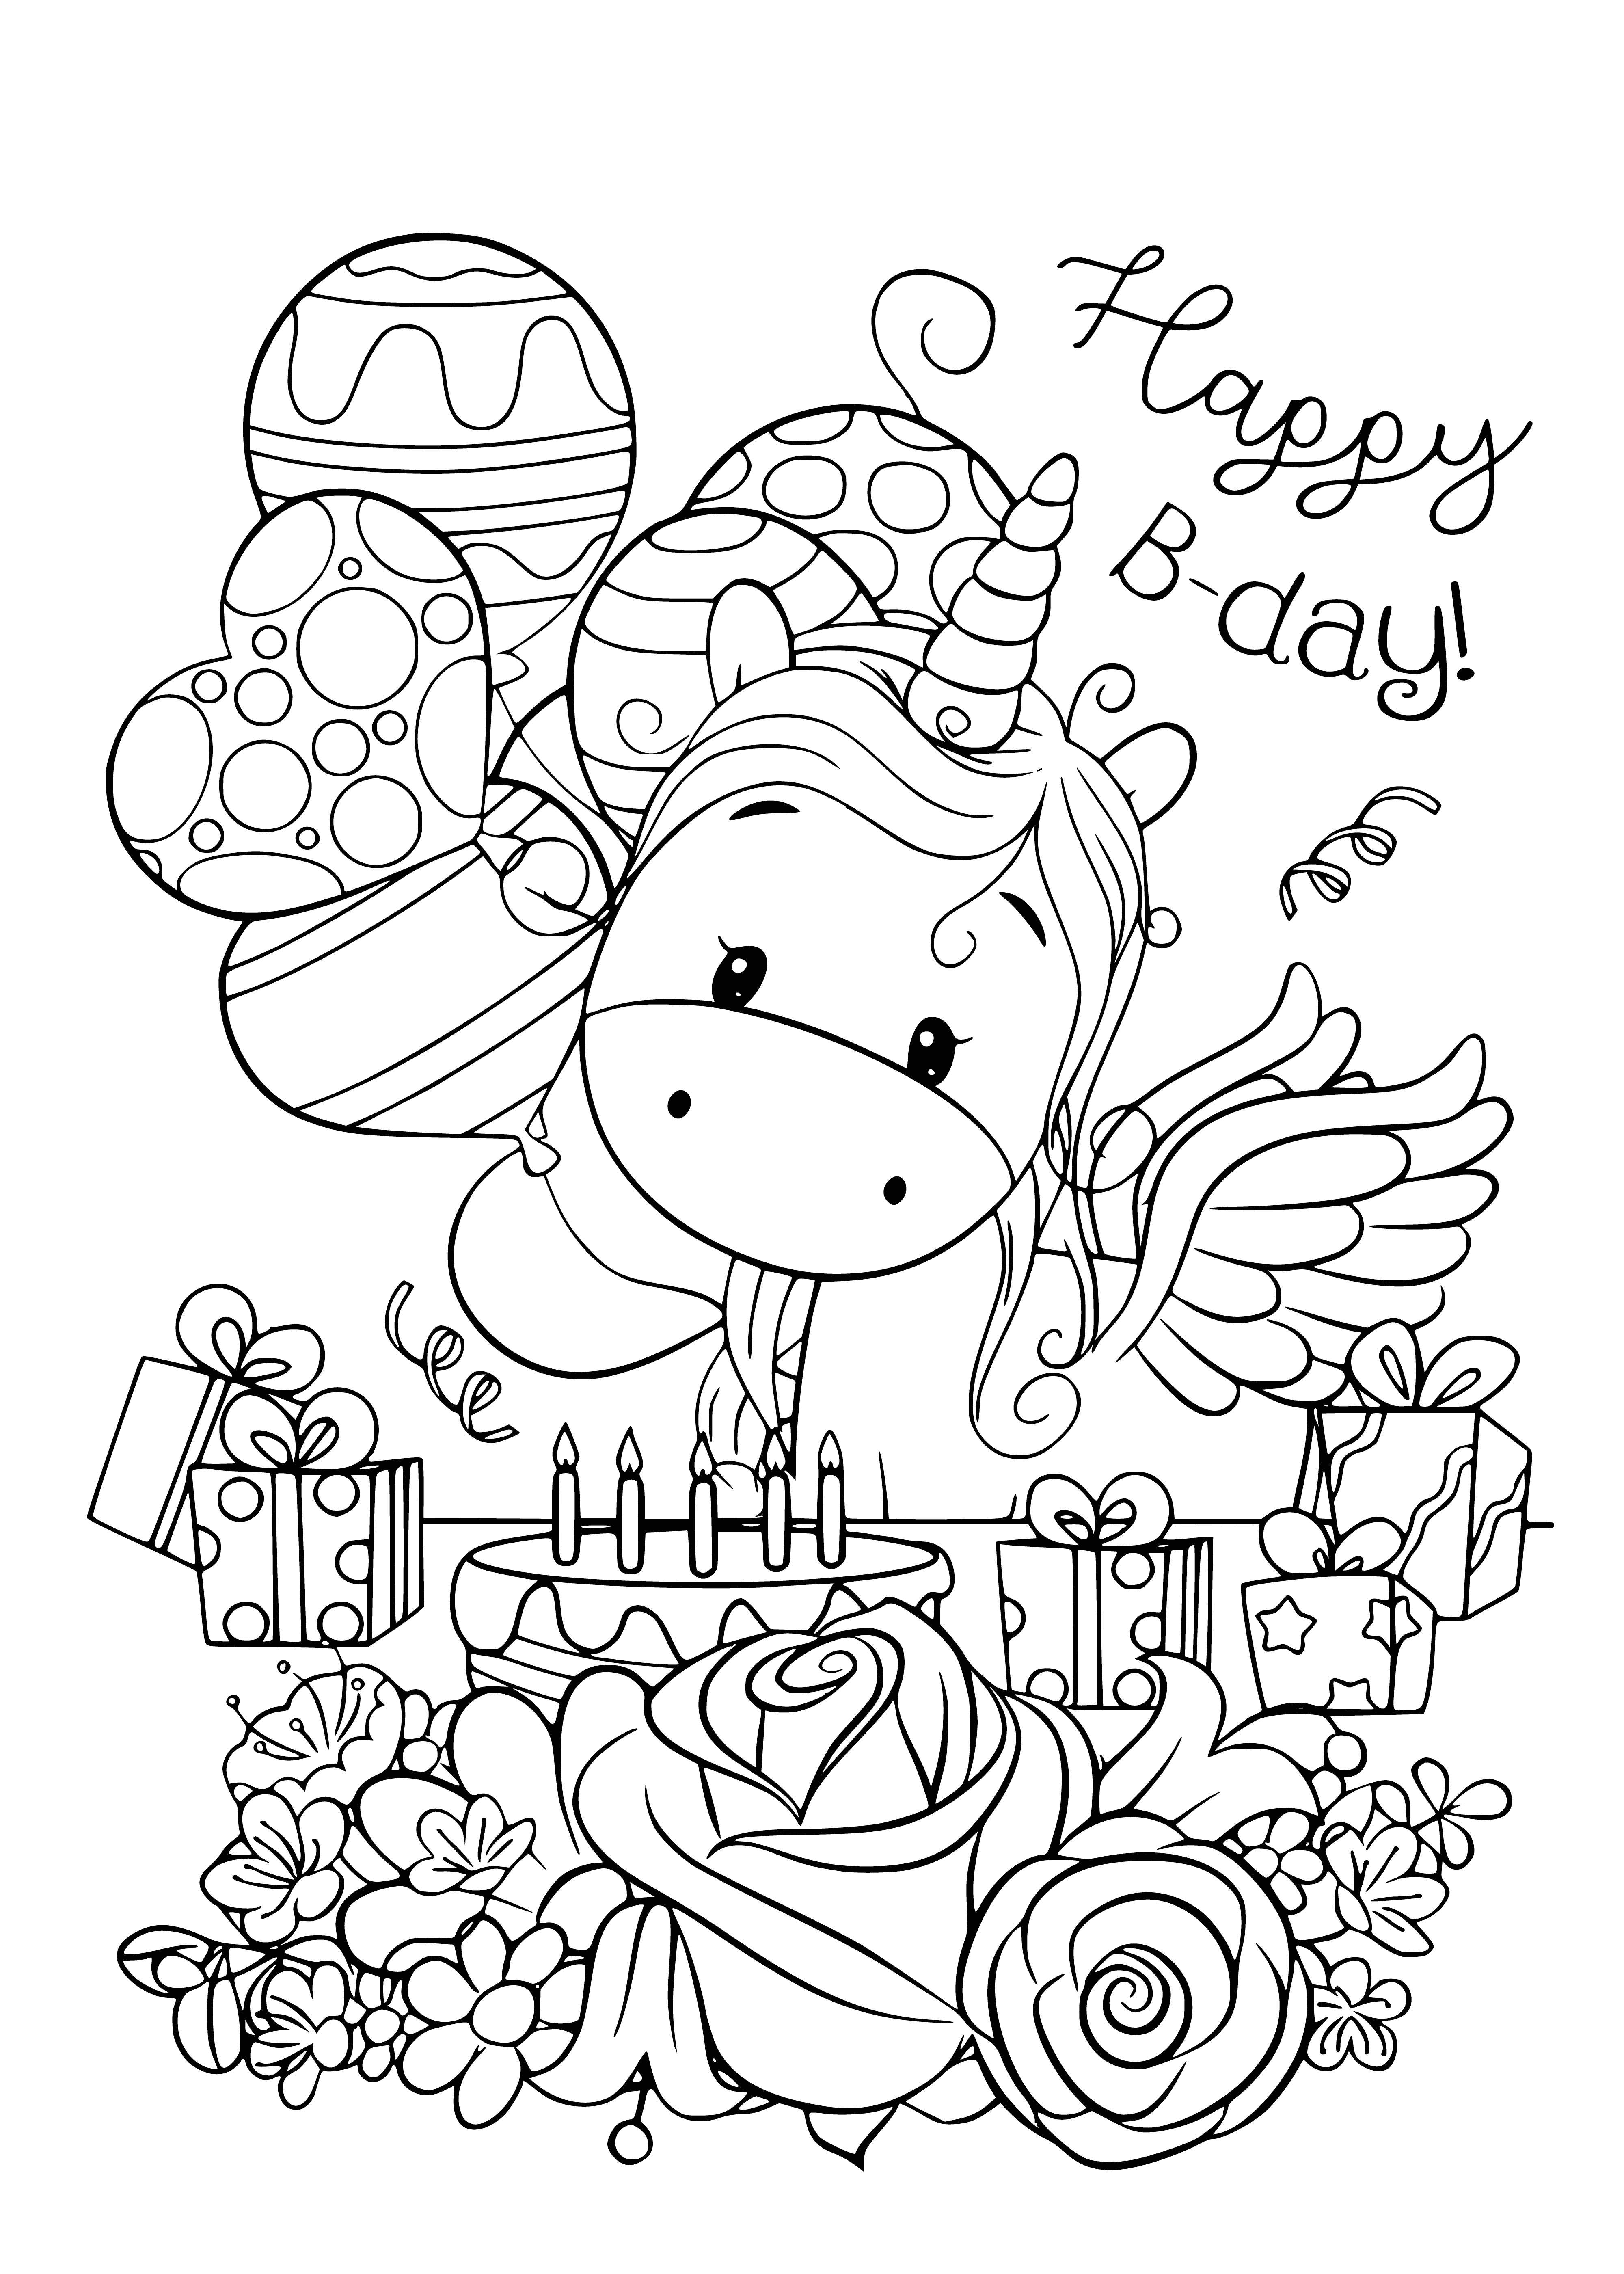 Happy Birthday coloring page